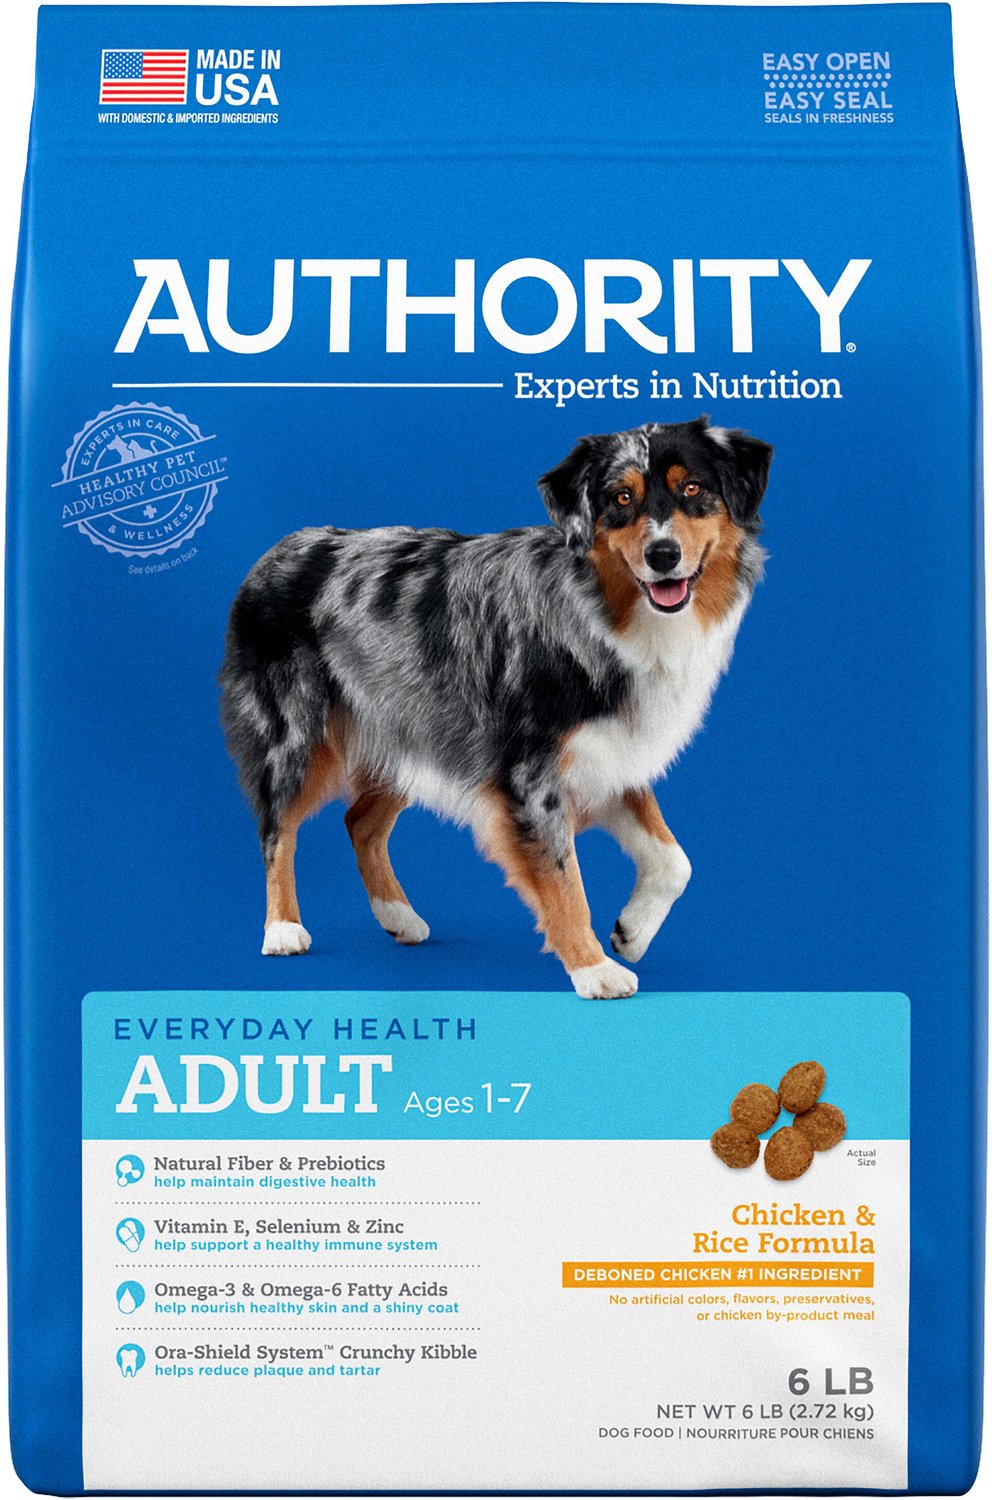 10 Best Authority Dog Foods A Comprehensive Review and Buying Guide